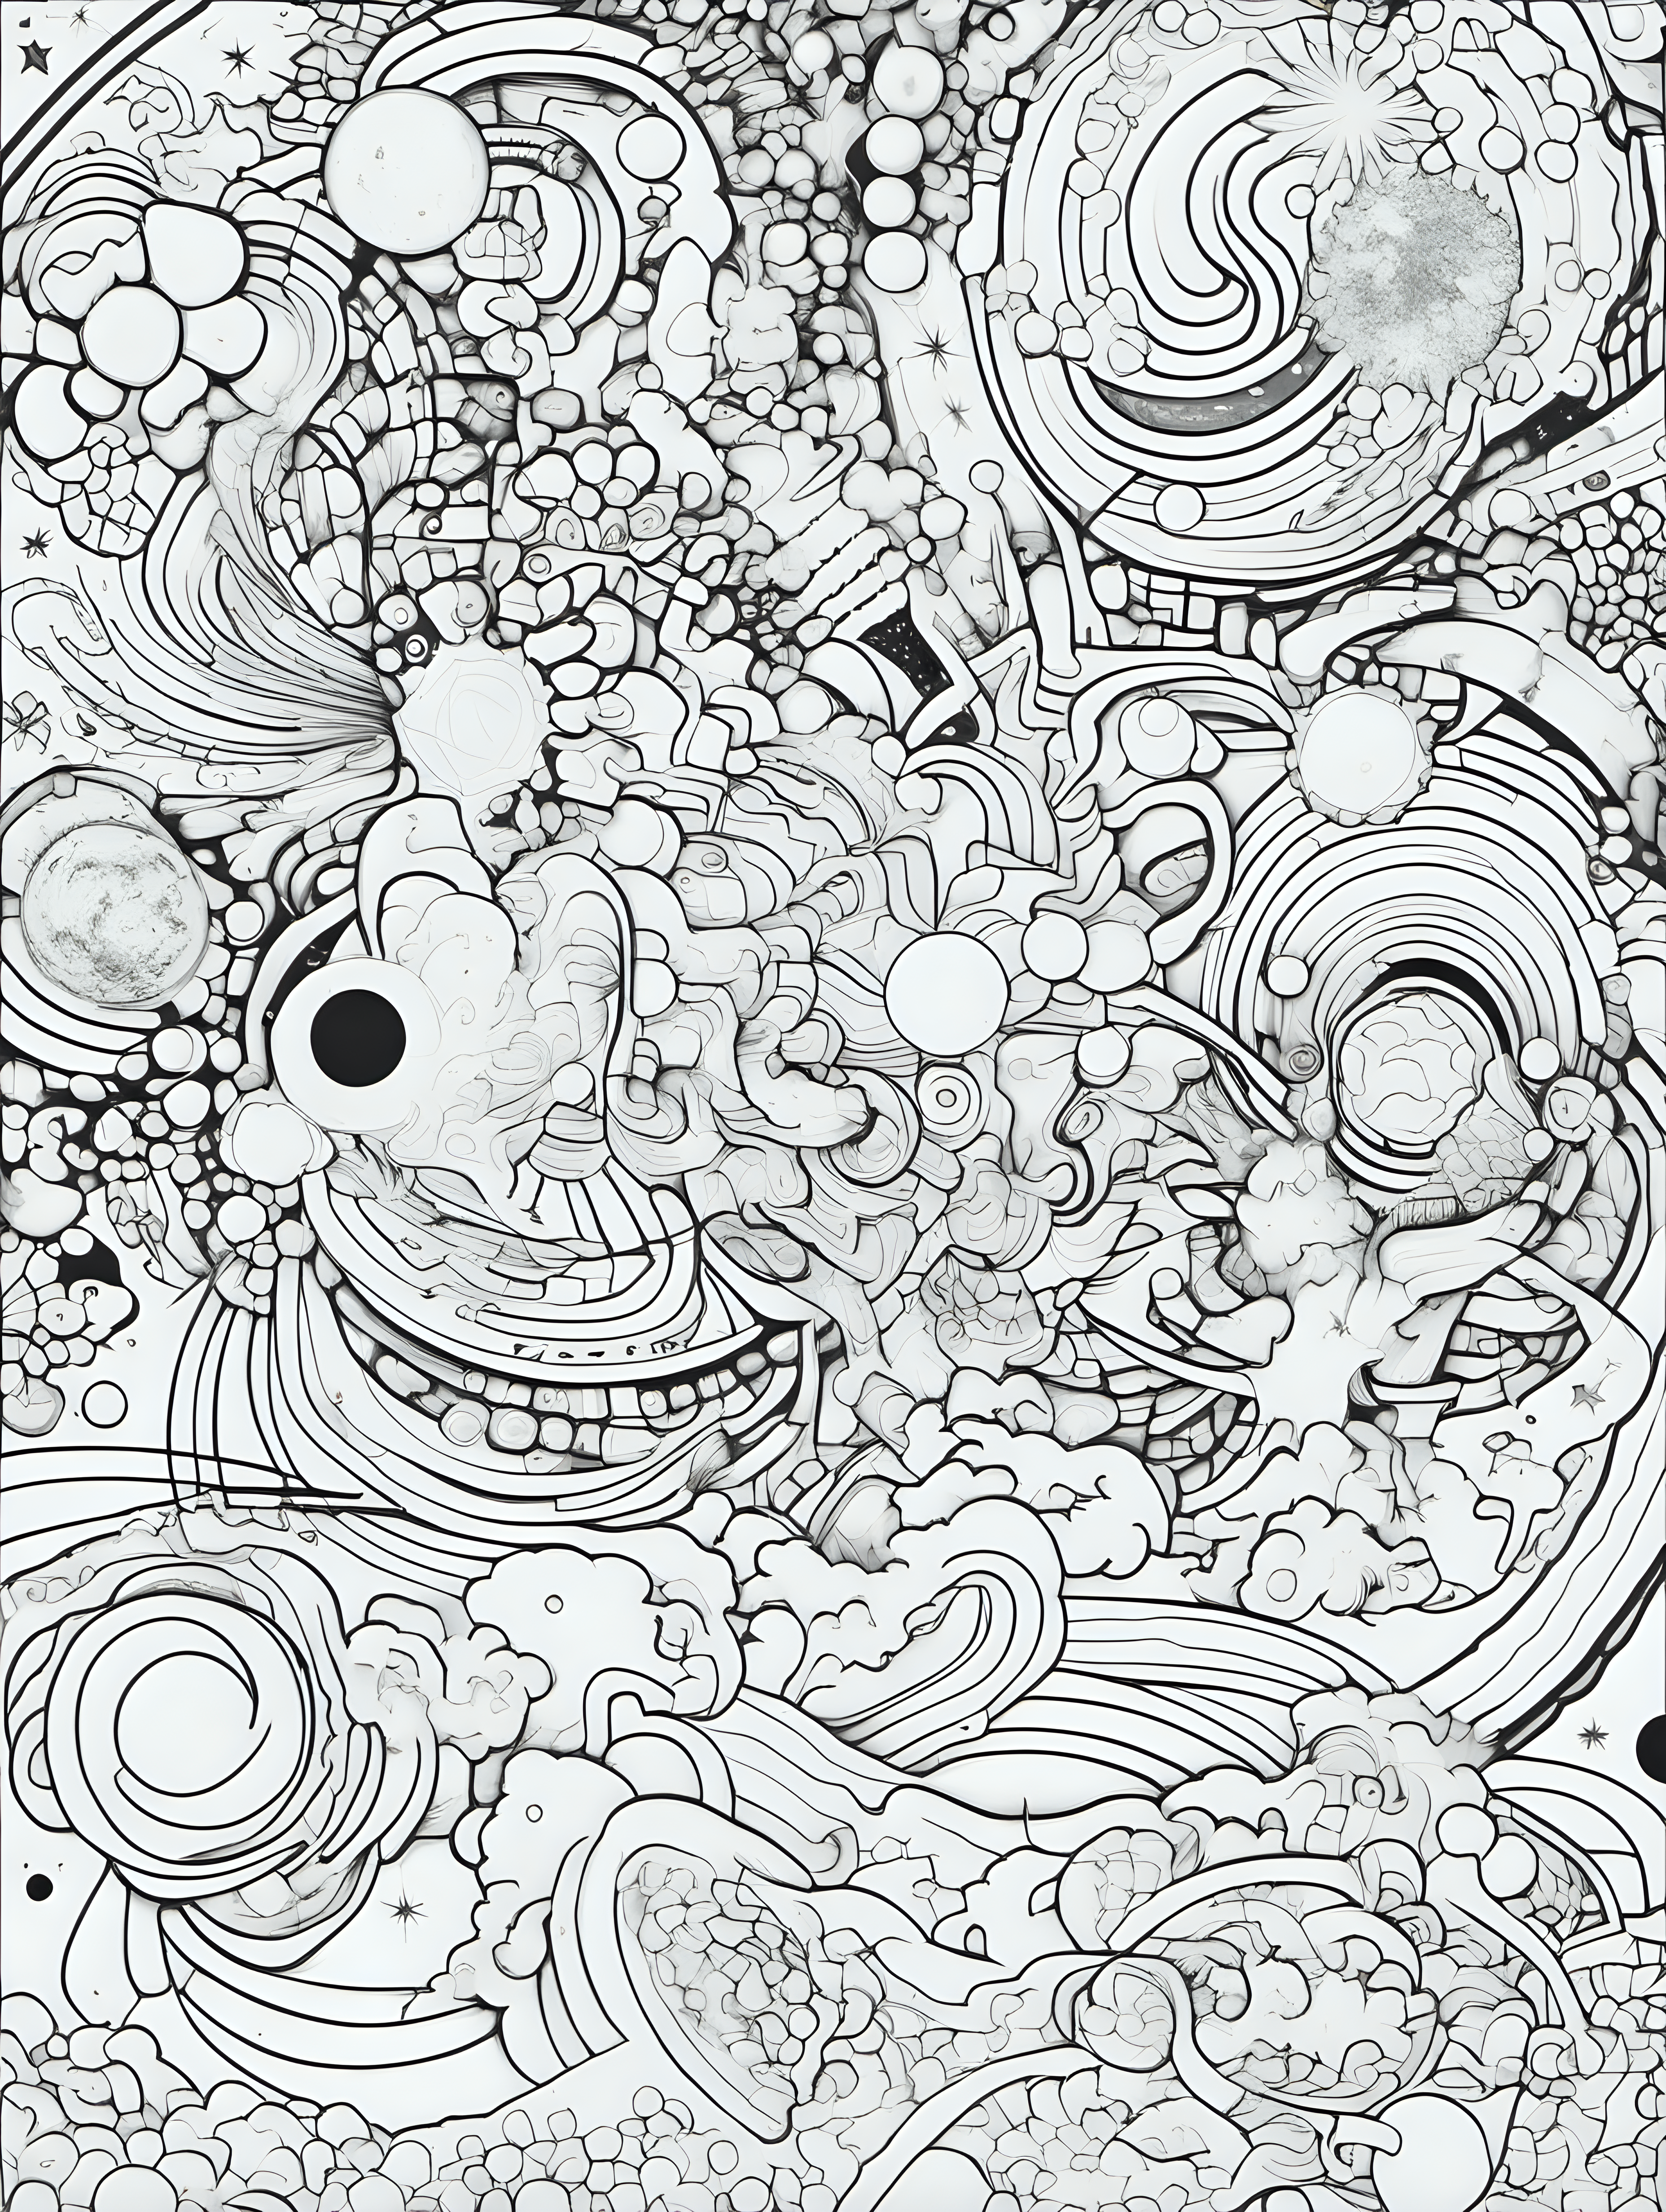 universe abstract, coloring page, no color